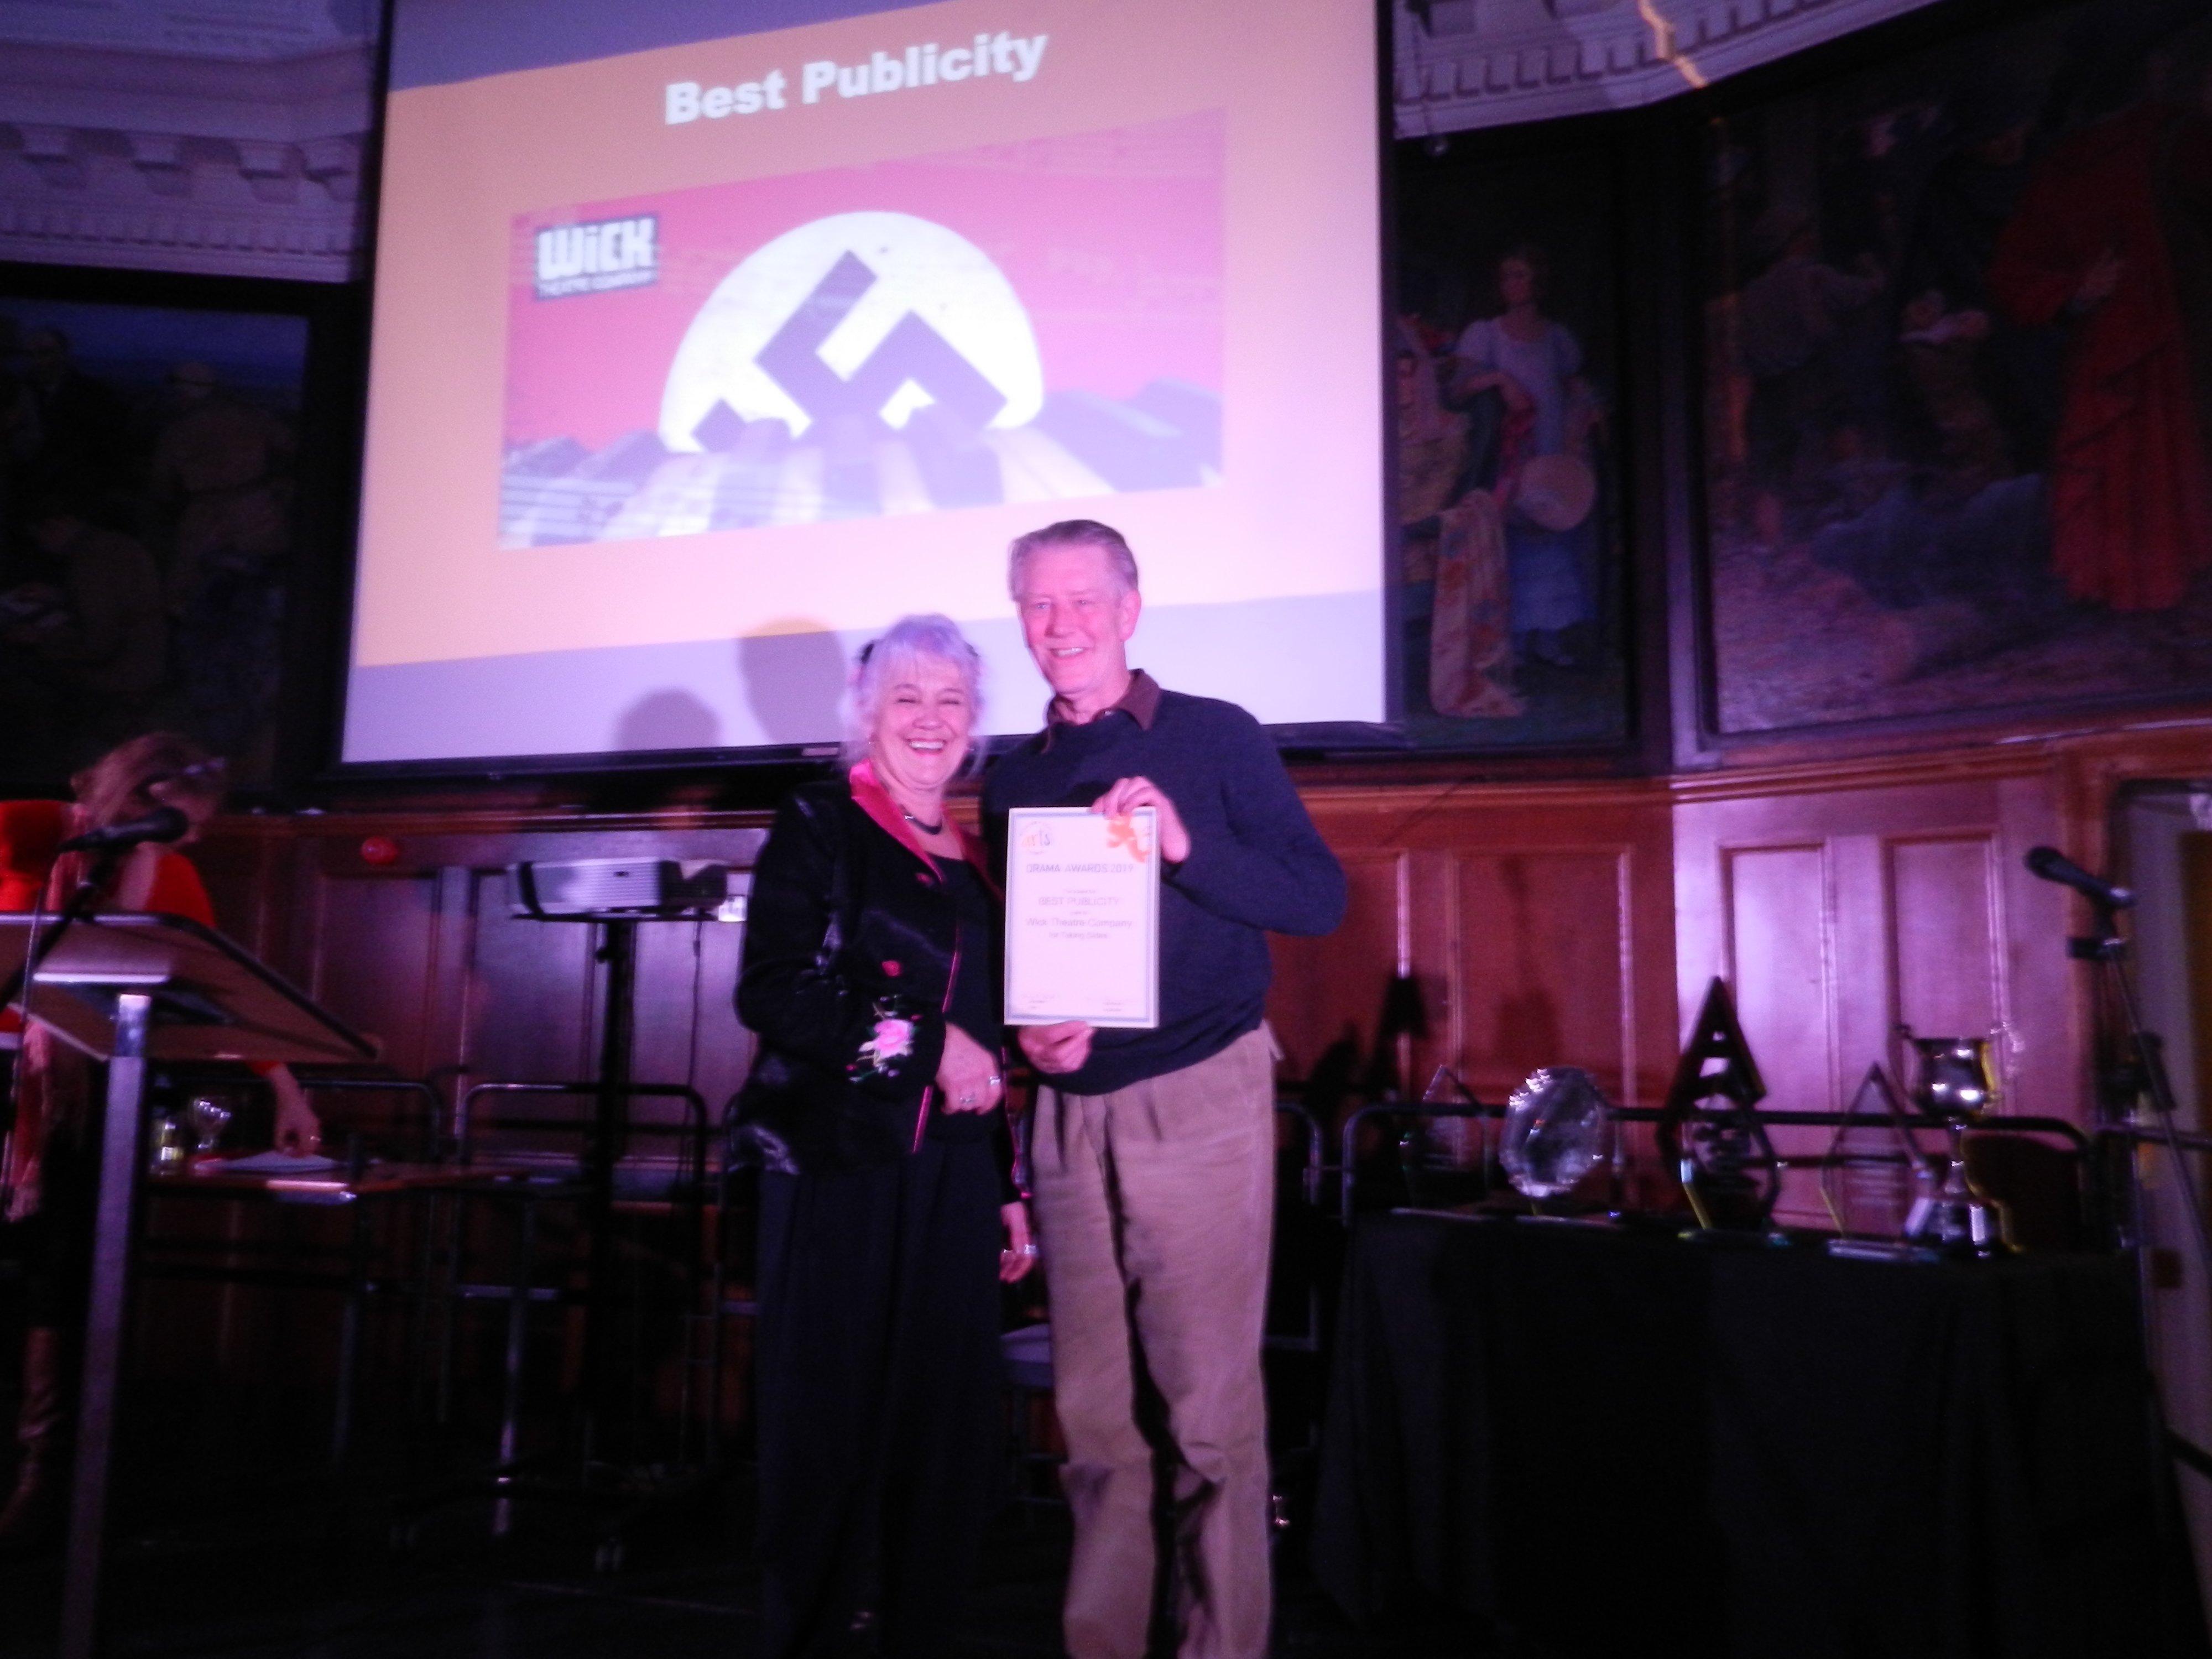 Peter Joyce accepts the award for best publicity for Wick Theatre Company's Taking Sides